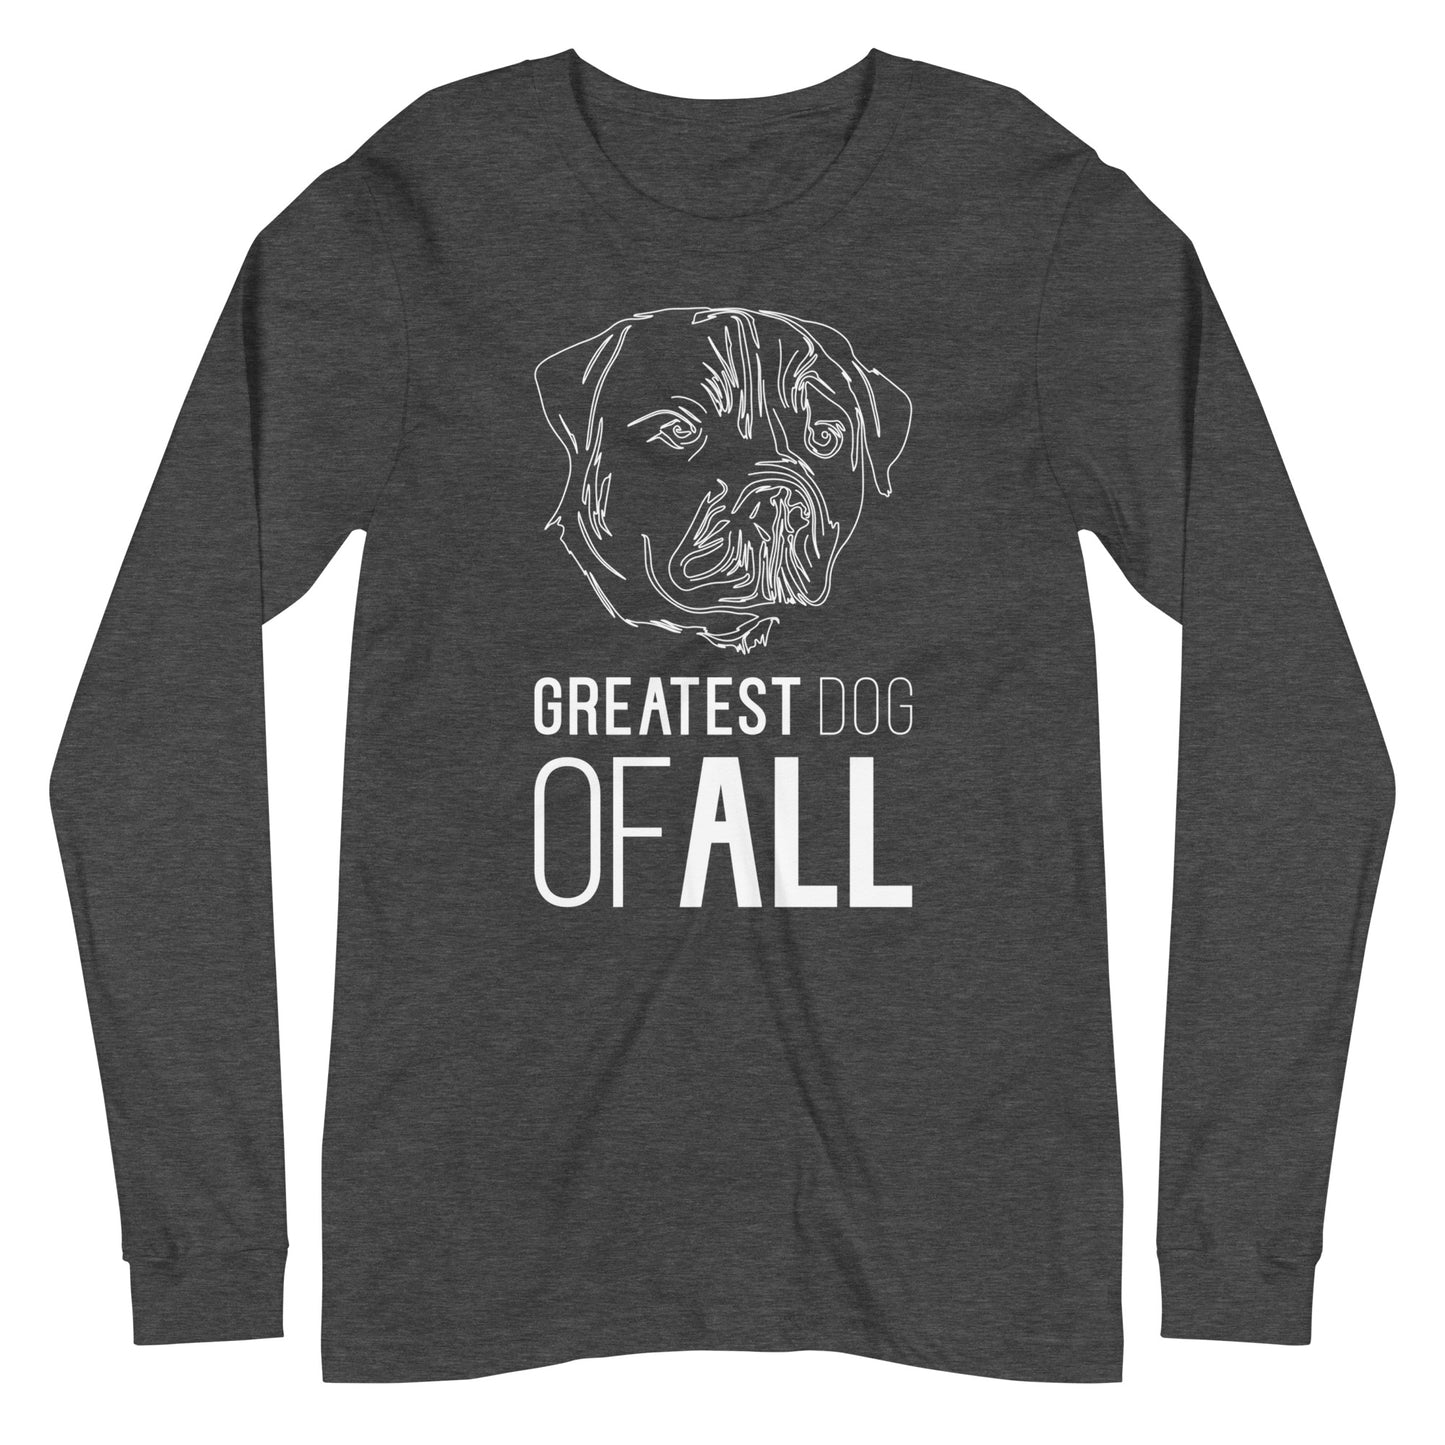 White line Rottweiler face with Greatest Dog of All caption on unisex dark grey heather long sleeve t-shirt